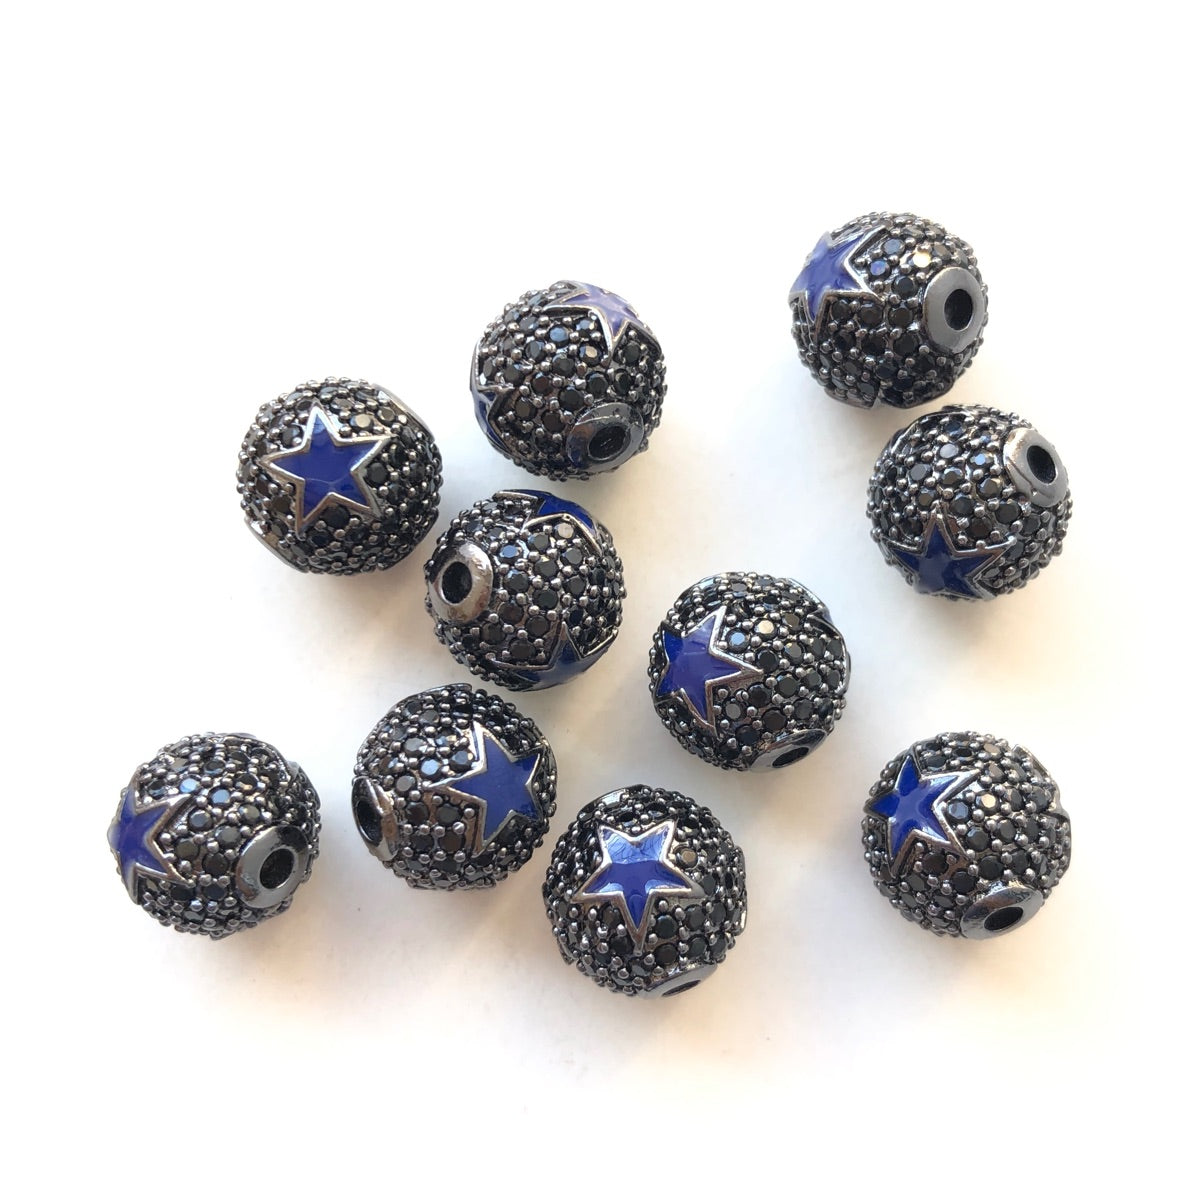 10-20pcs/lot 10mm CZ Paved Cowboys Star Ball Spacers Beads Black on Black CZ Paved Spacers 10mm Beads American Football Sports Ball Beads New Spacers Arrivals Charms Beads Beyond